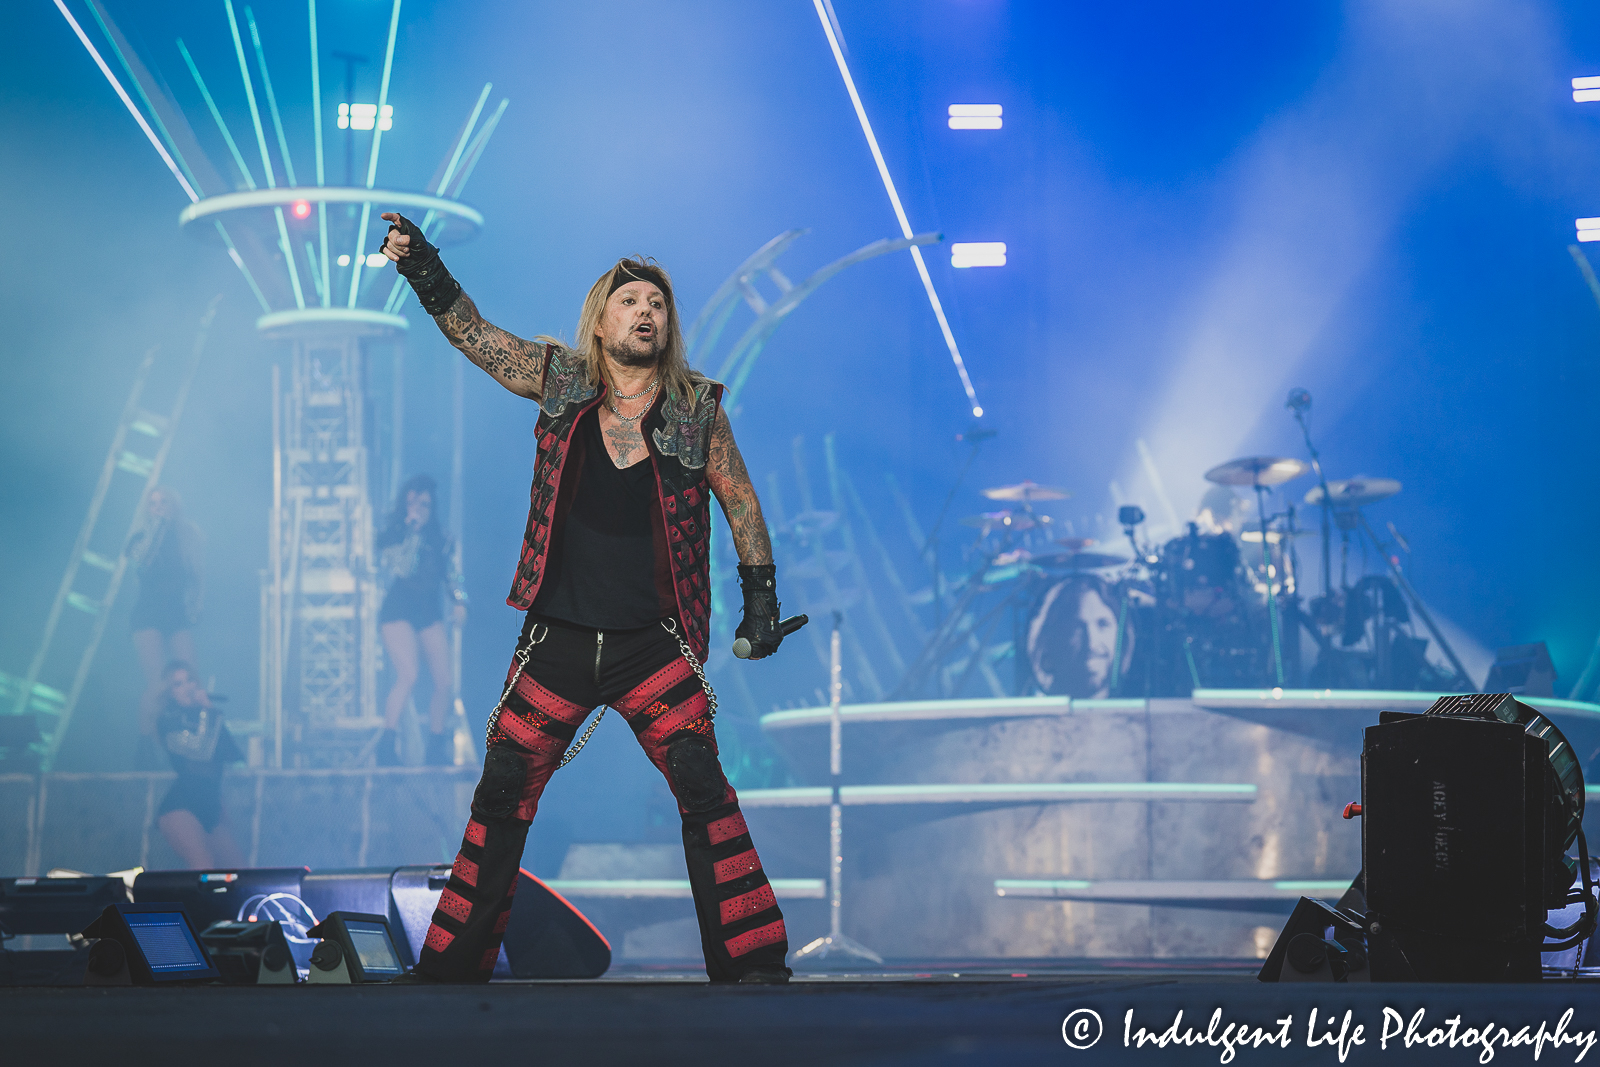 Lead singer Vince Neil of Mötley Crüe in concert at Kauffman Stadium in Kansas City, MO on July 19, 2022.